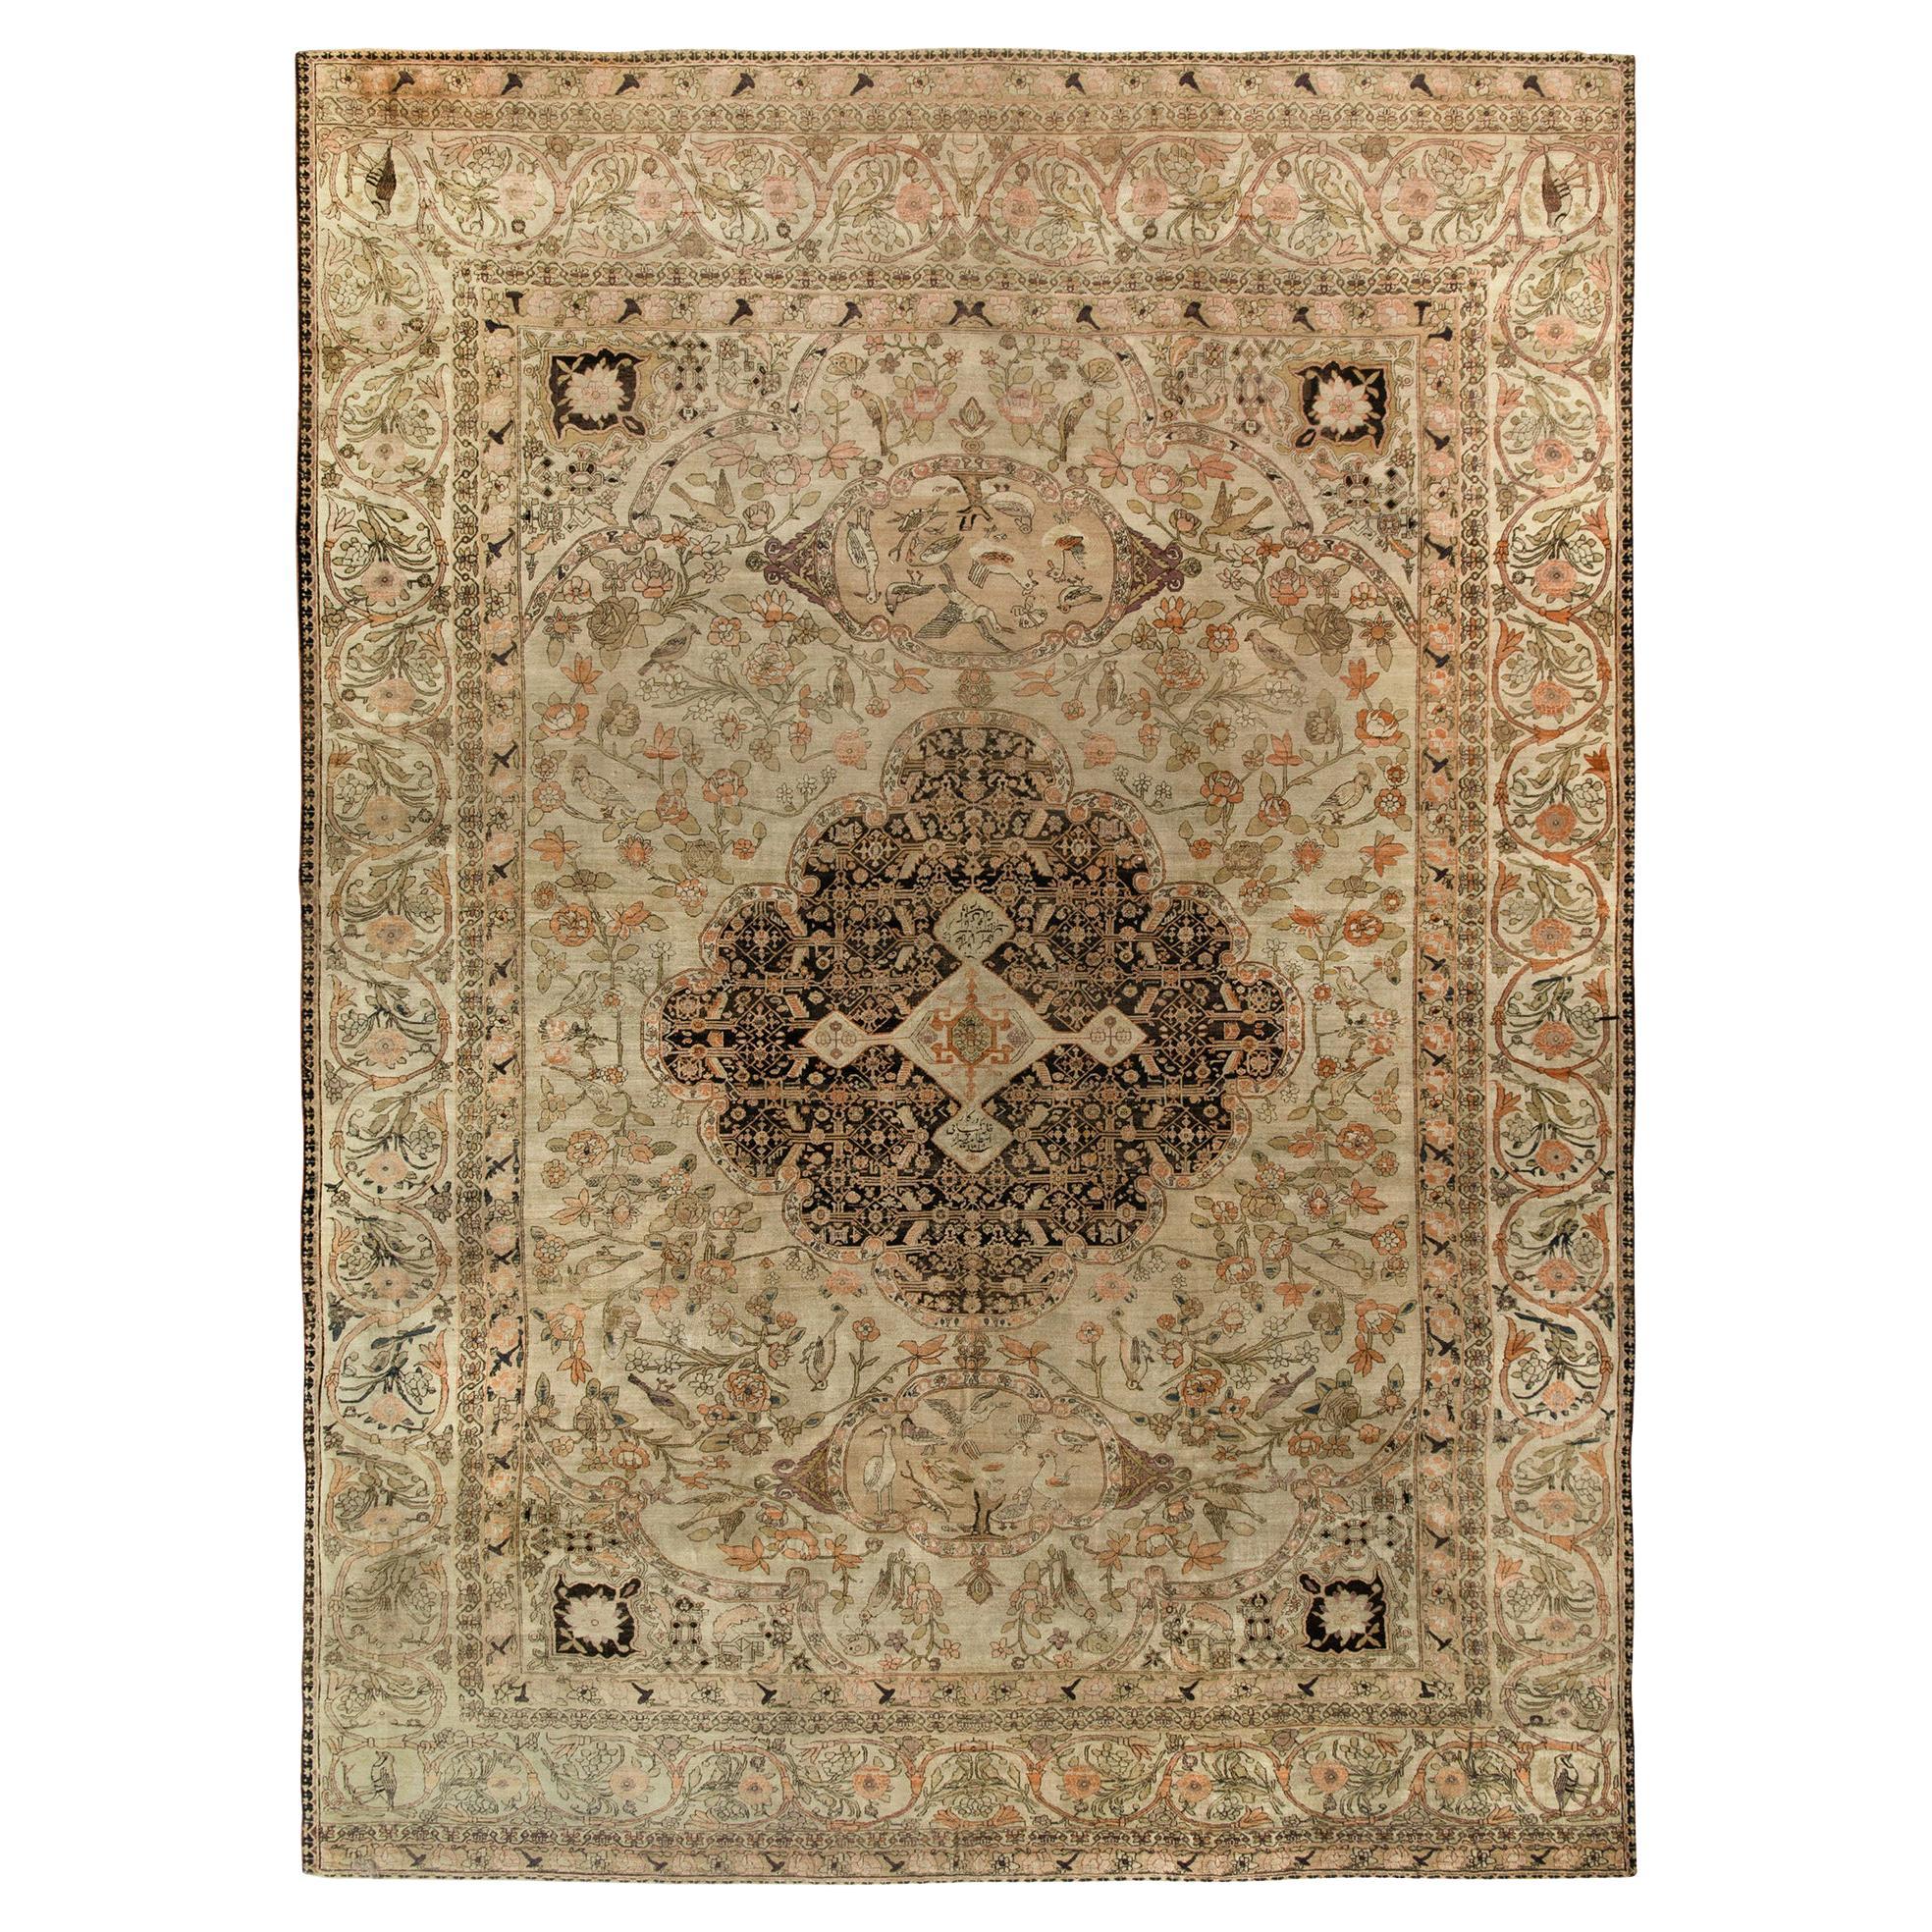 Hand-Knotted Antique Kerman Rug in Beige-Brown Pictorial Pattern by Rug & Kilim